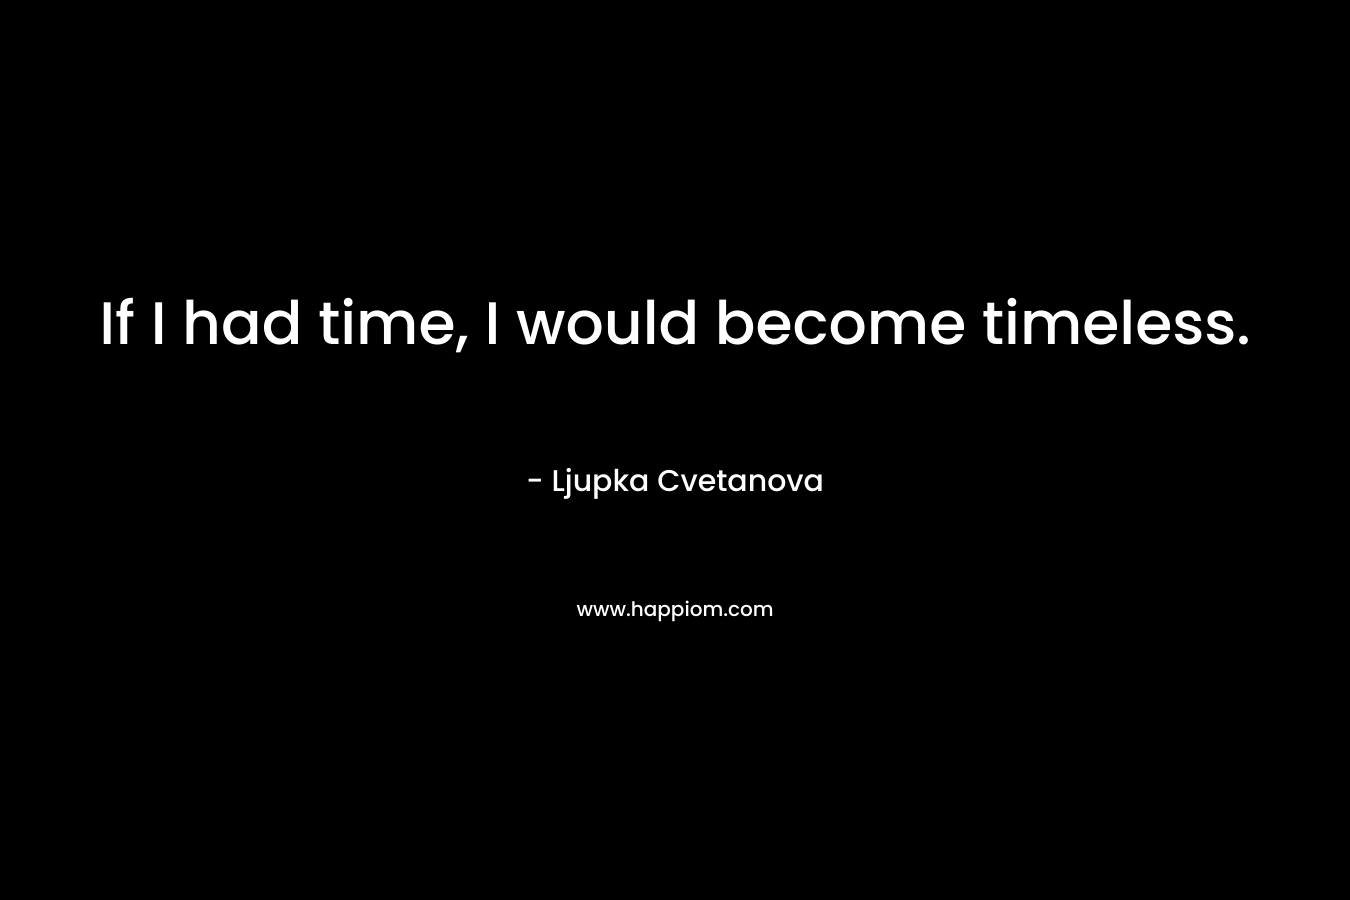 If I had time, I would become timeless.